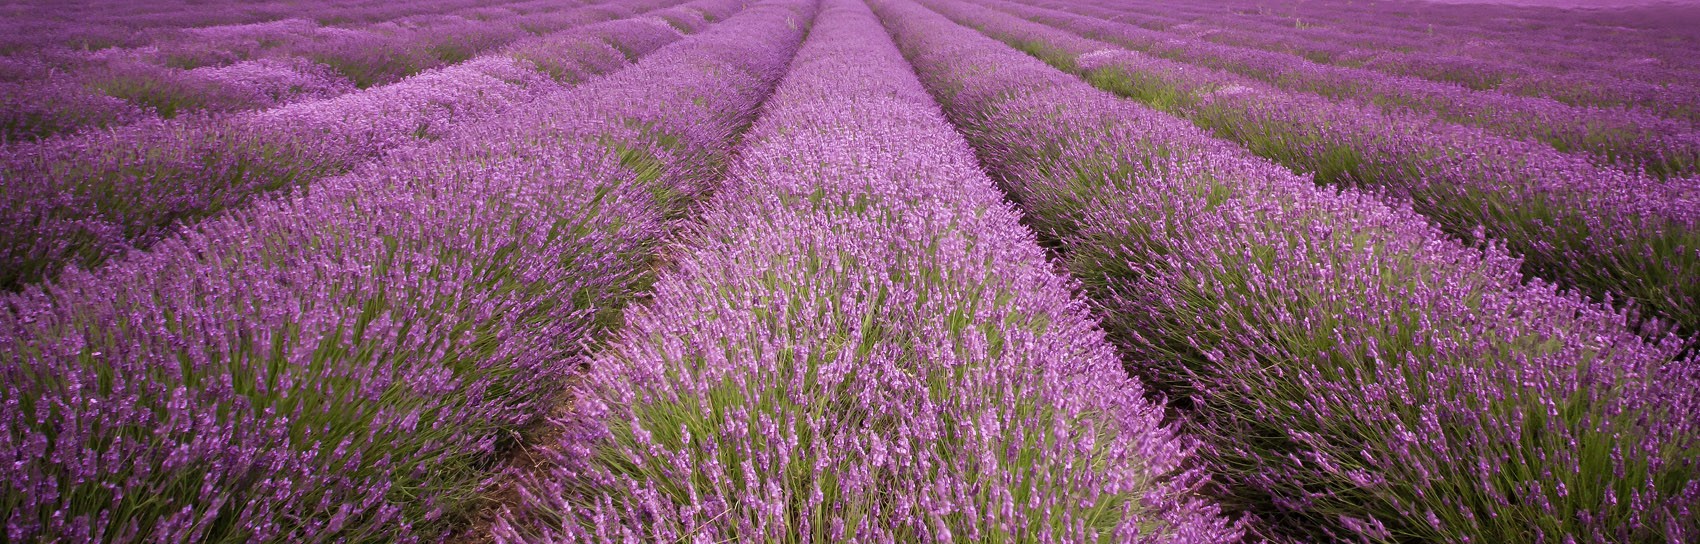 Hitchin Lavender in Hertfordshire. Photograph by GRAHAM CUSTANCE